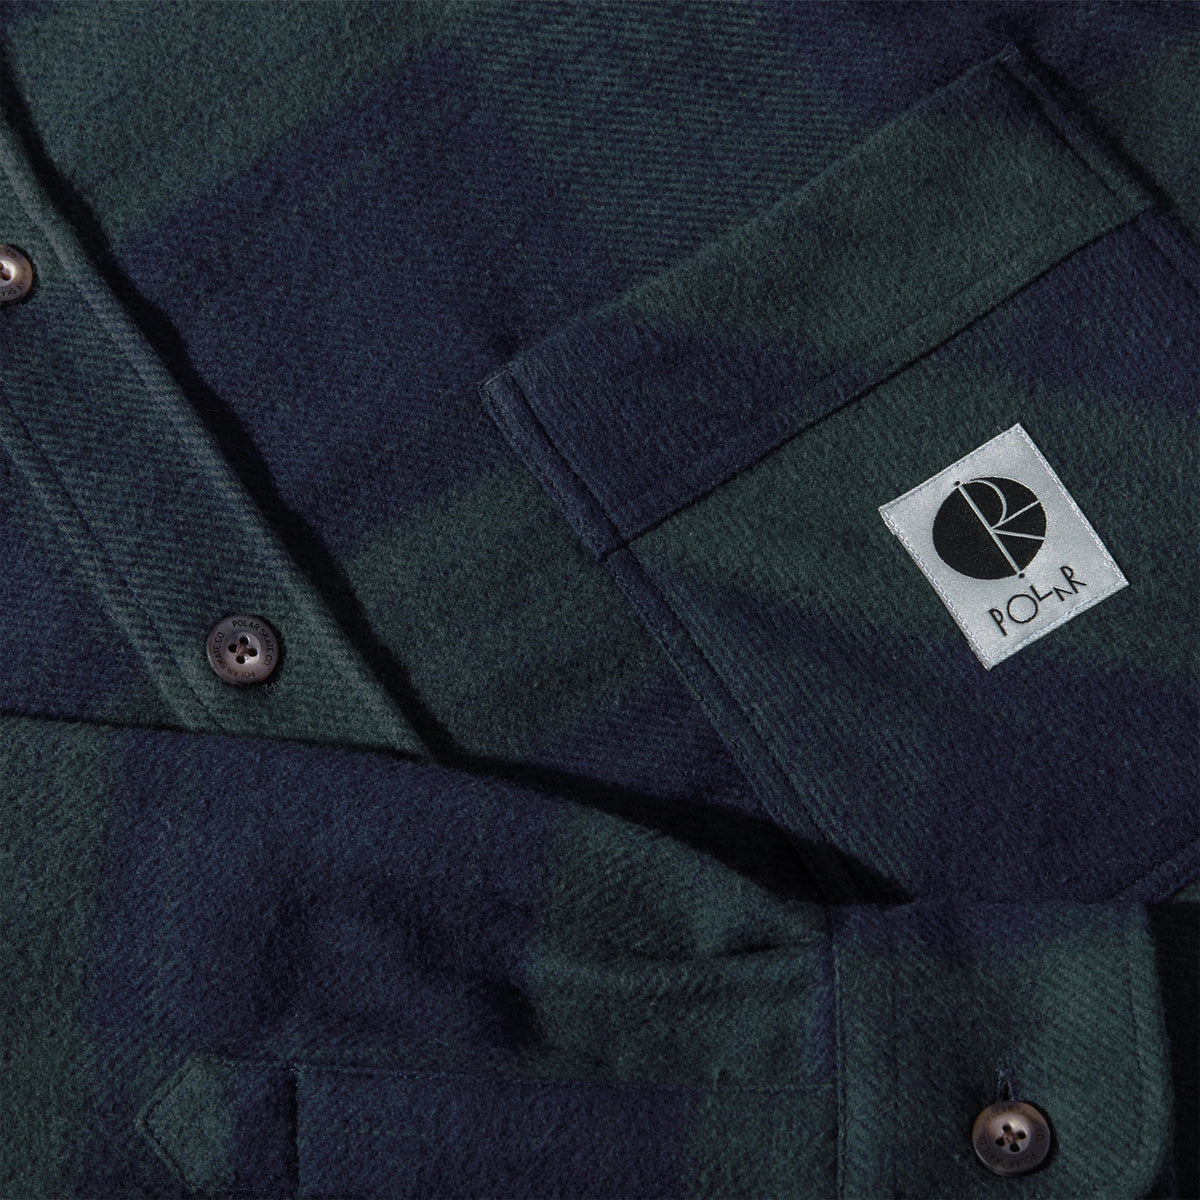 Flannel Shirt (Navy/Teal)